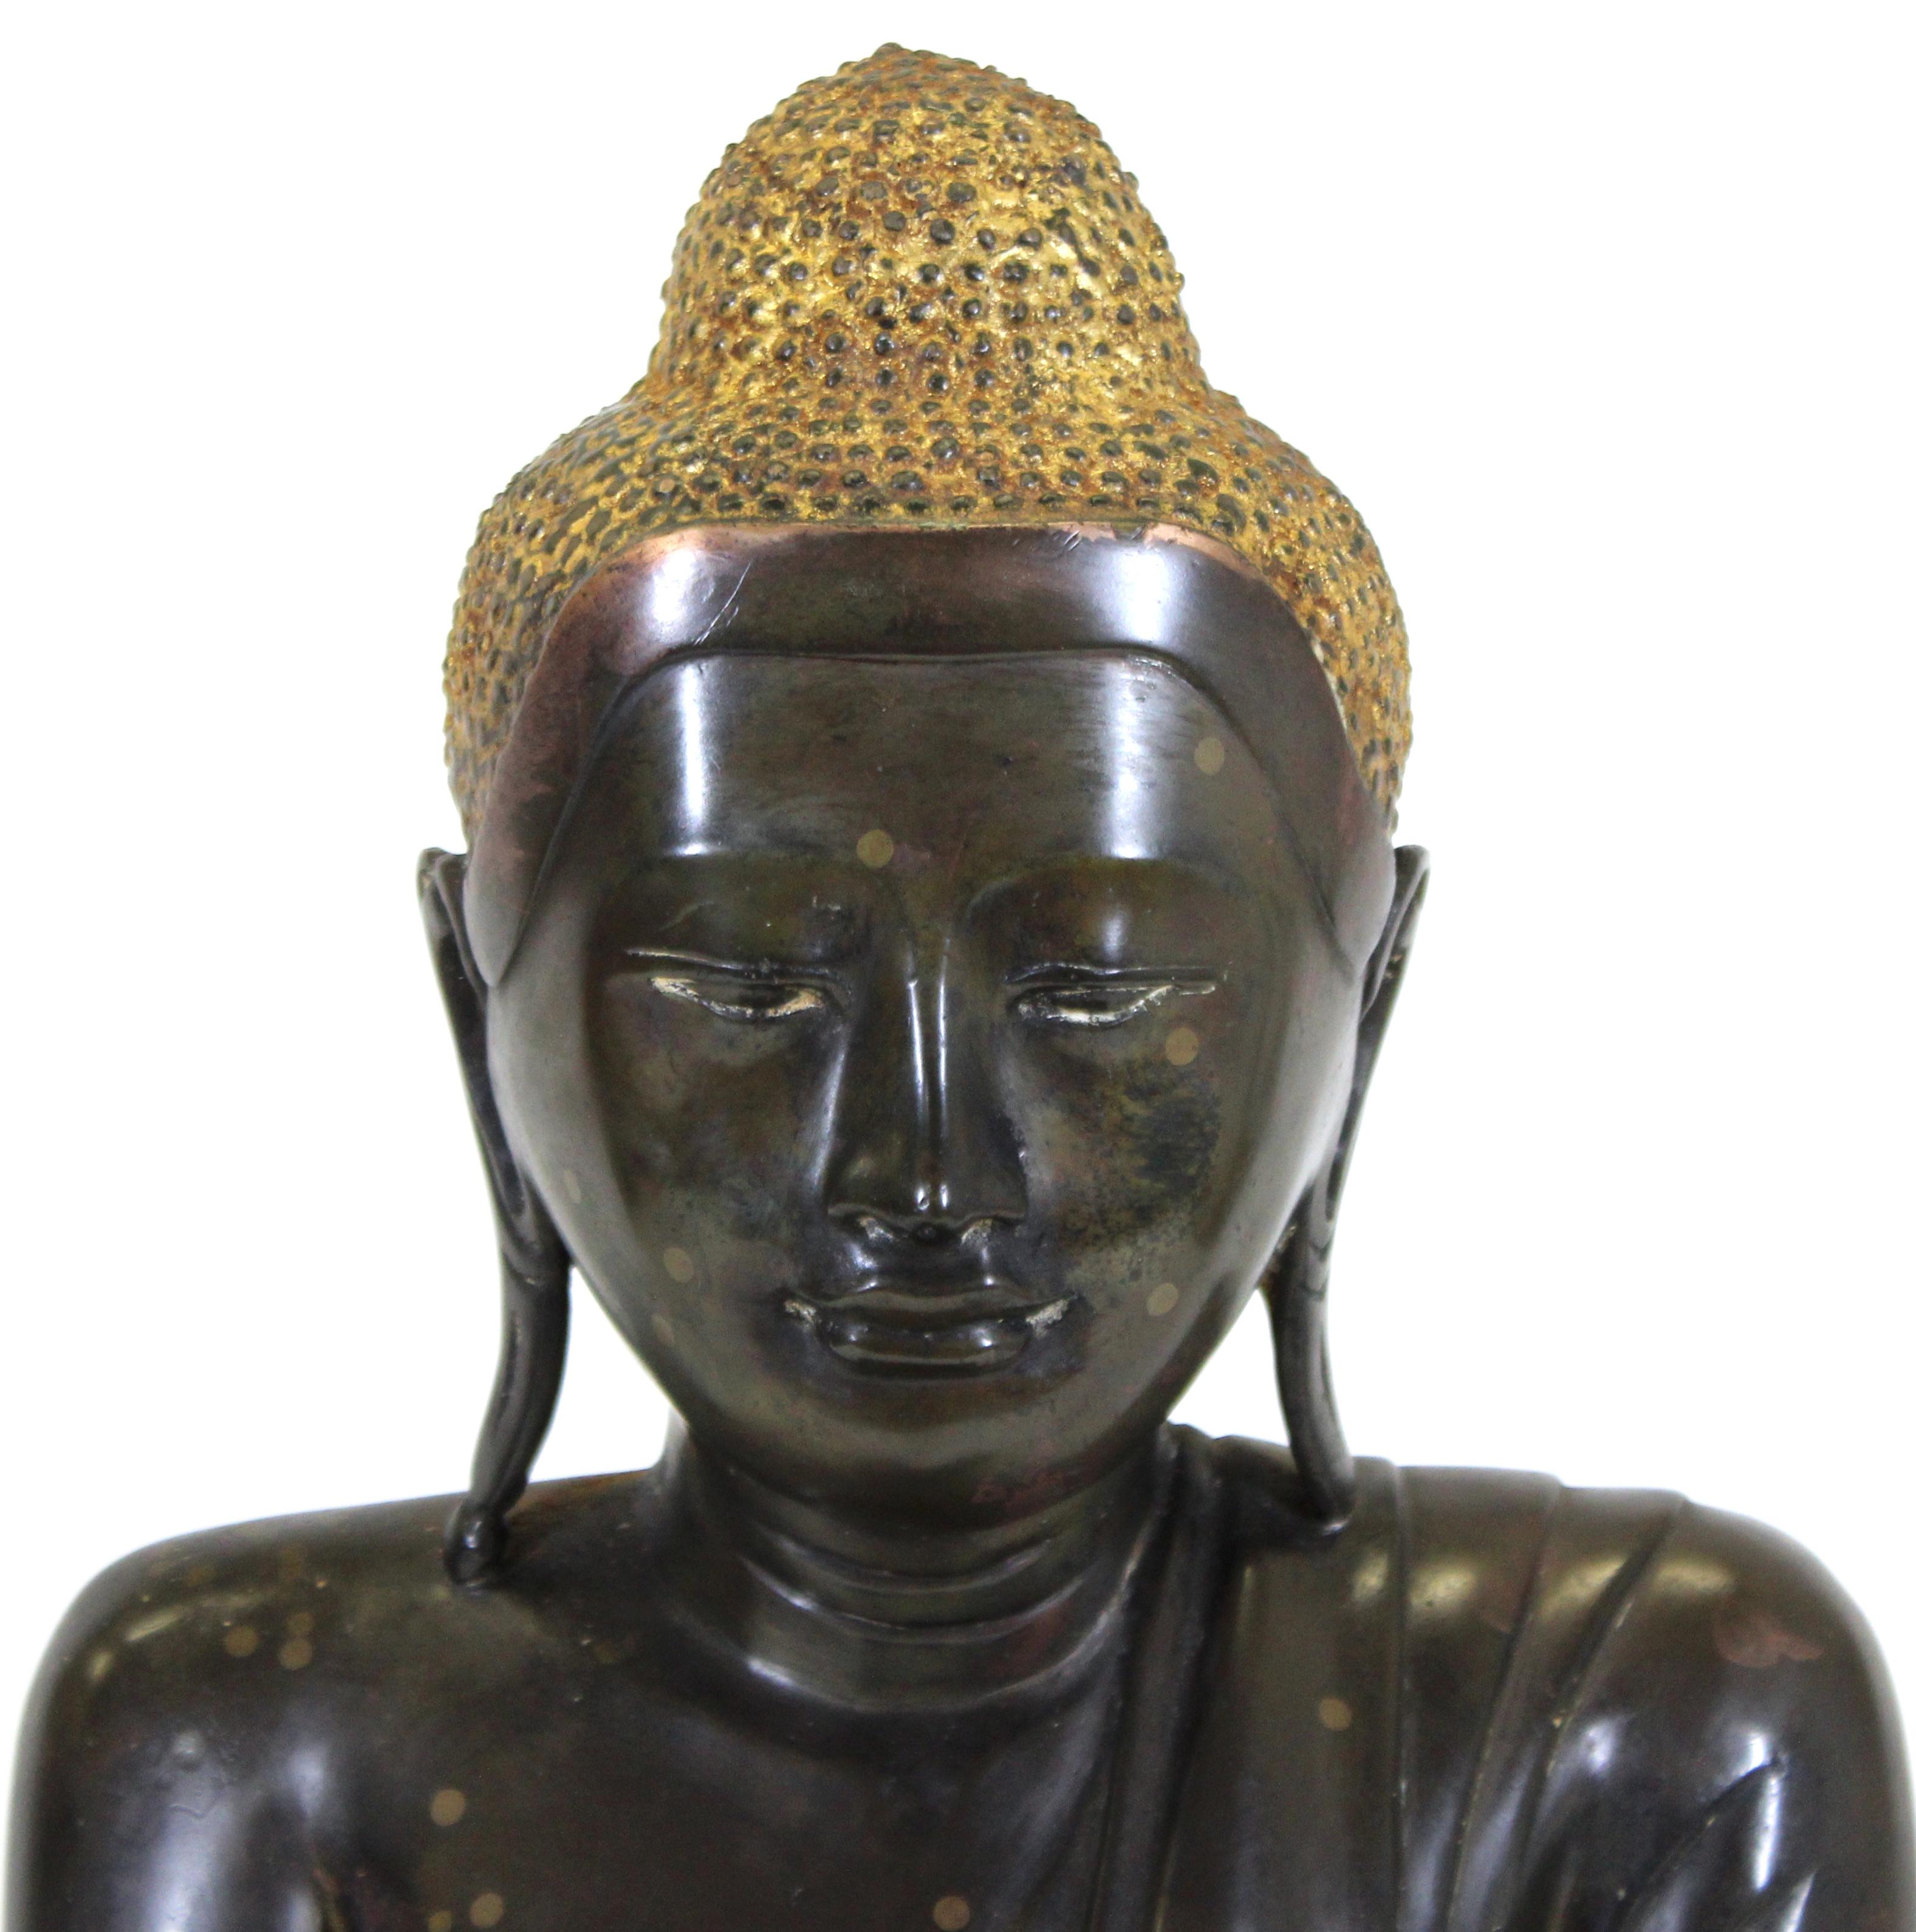 Burmese bronze sculpture of a seated Buddha with partial gilding, with his hands in bhumisparsha mudra, the gesture of calling the earth to witness, symbolizing the moment of the Buddha's enlightenment. The piece was likely made in the early 20th